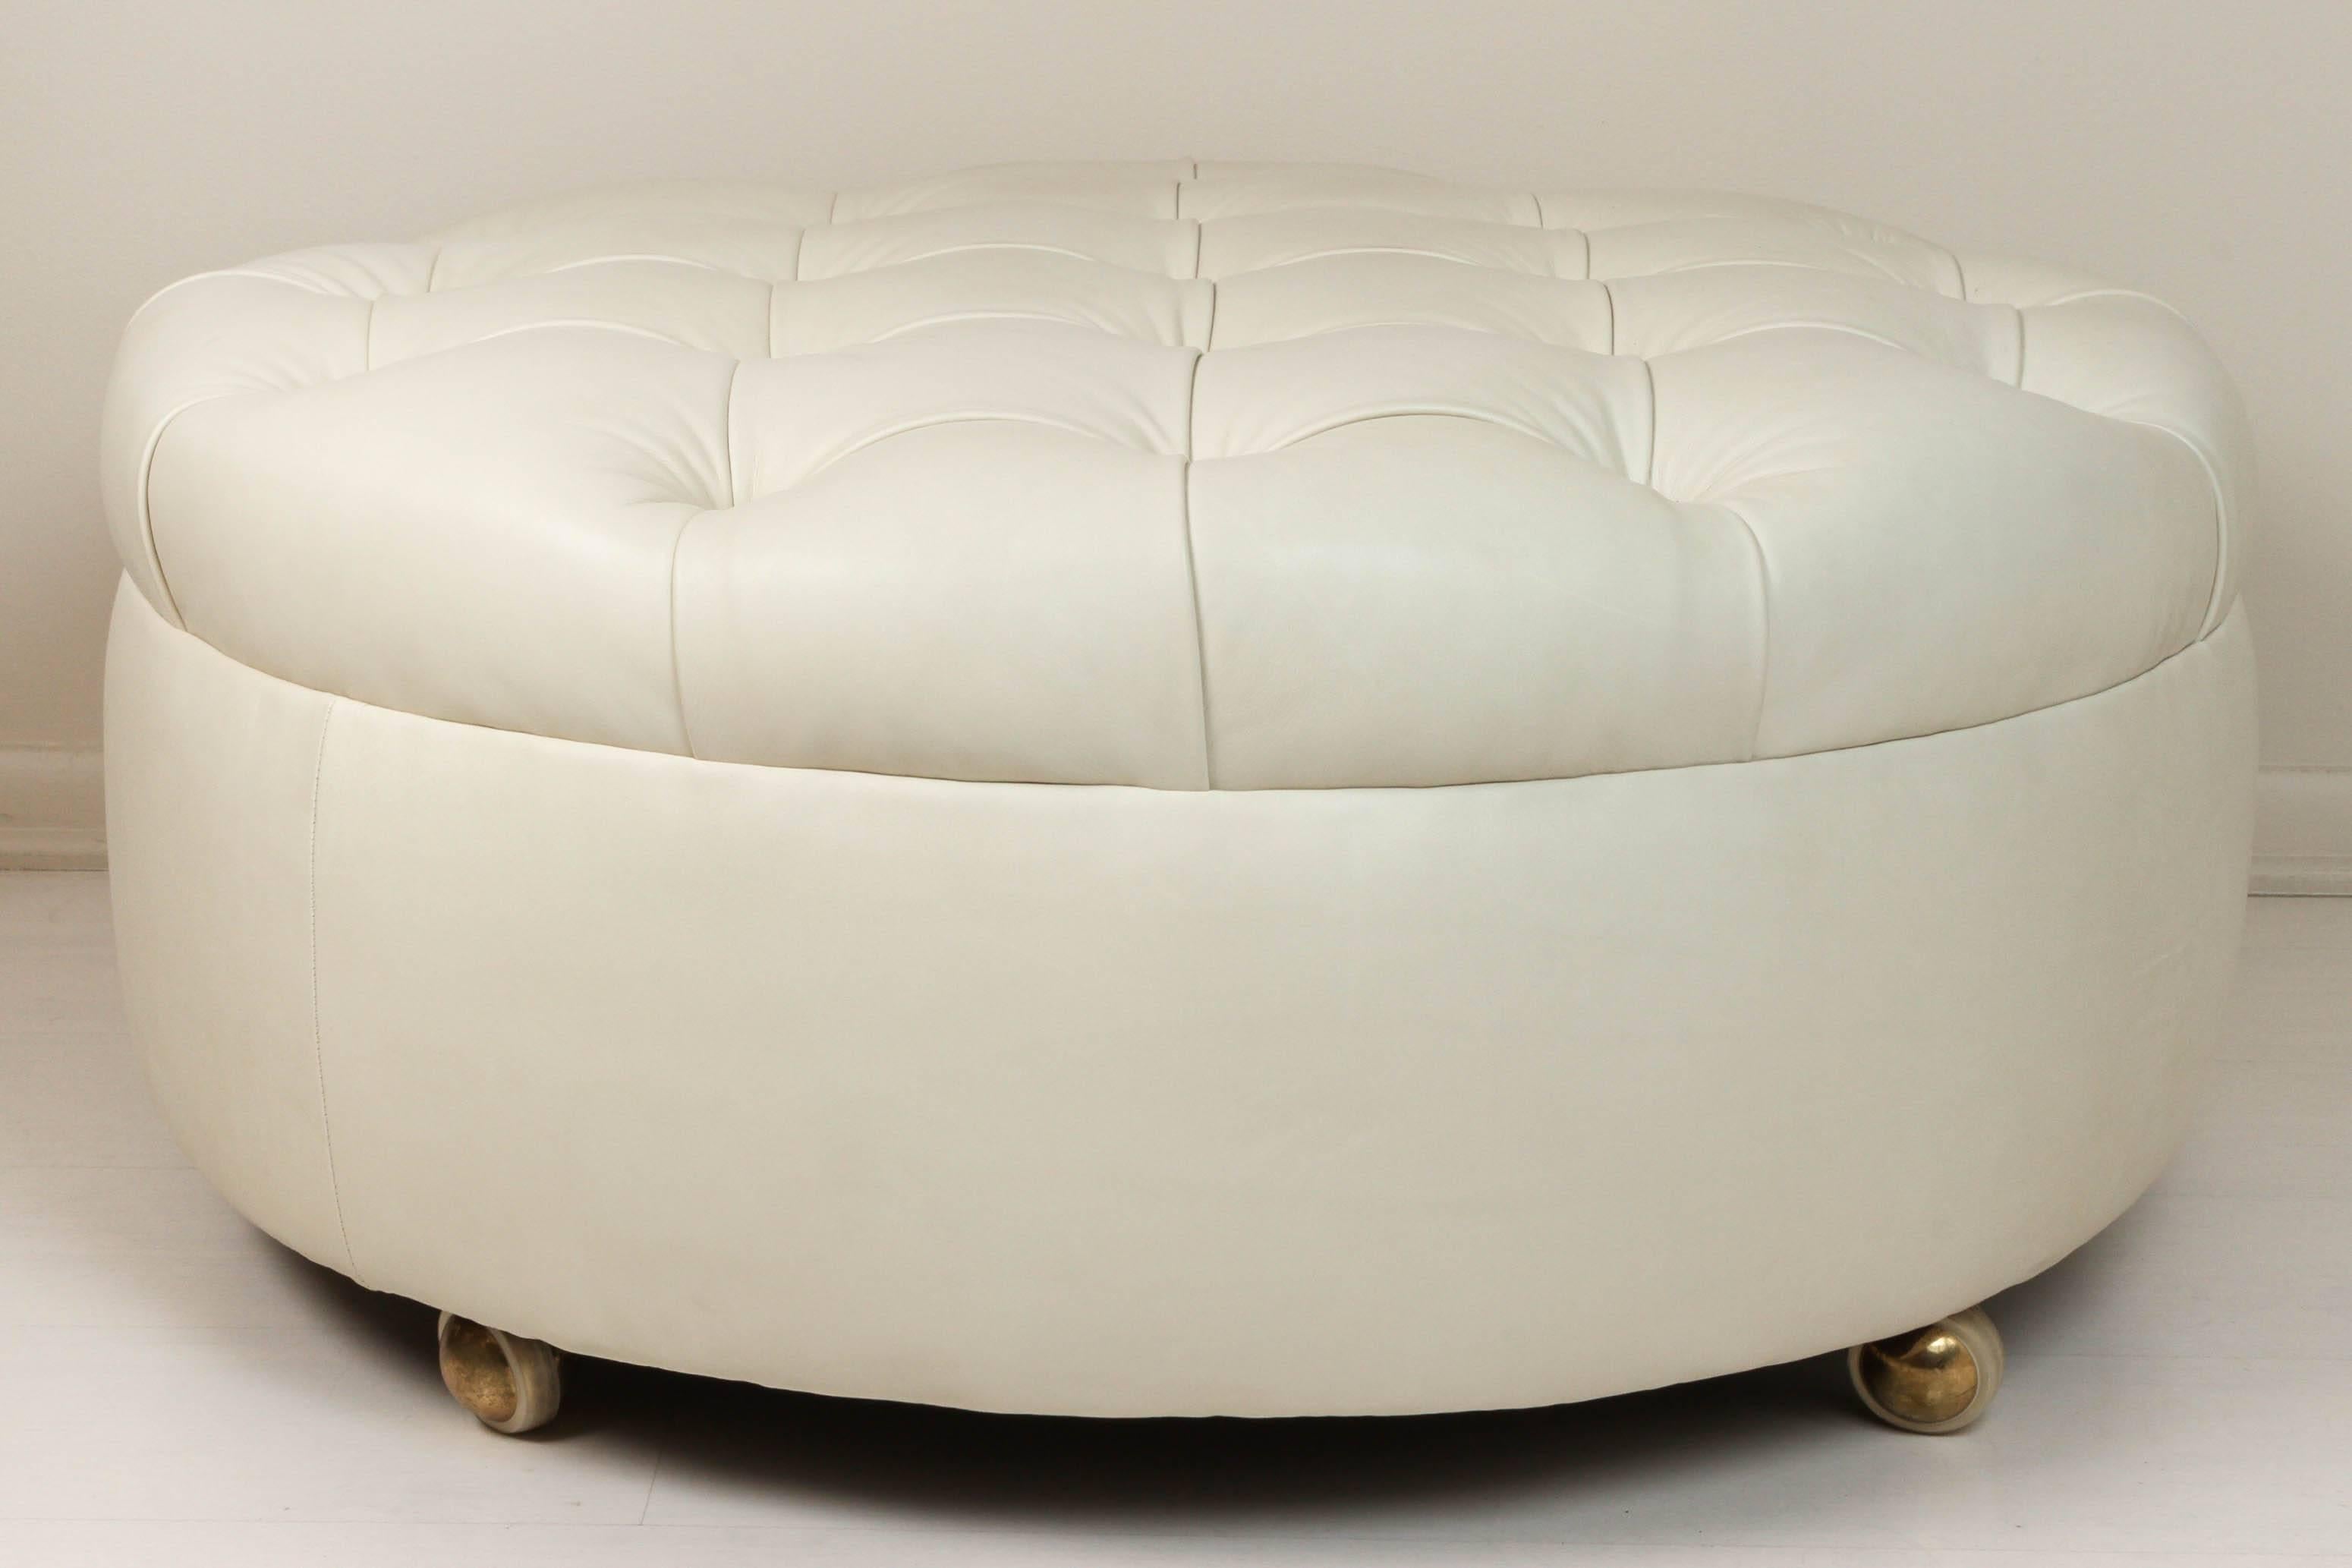 Leather Tufted French, 1960s Ottoman In Excellent Condition For Sale In Santa Monica, CA